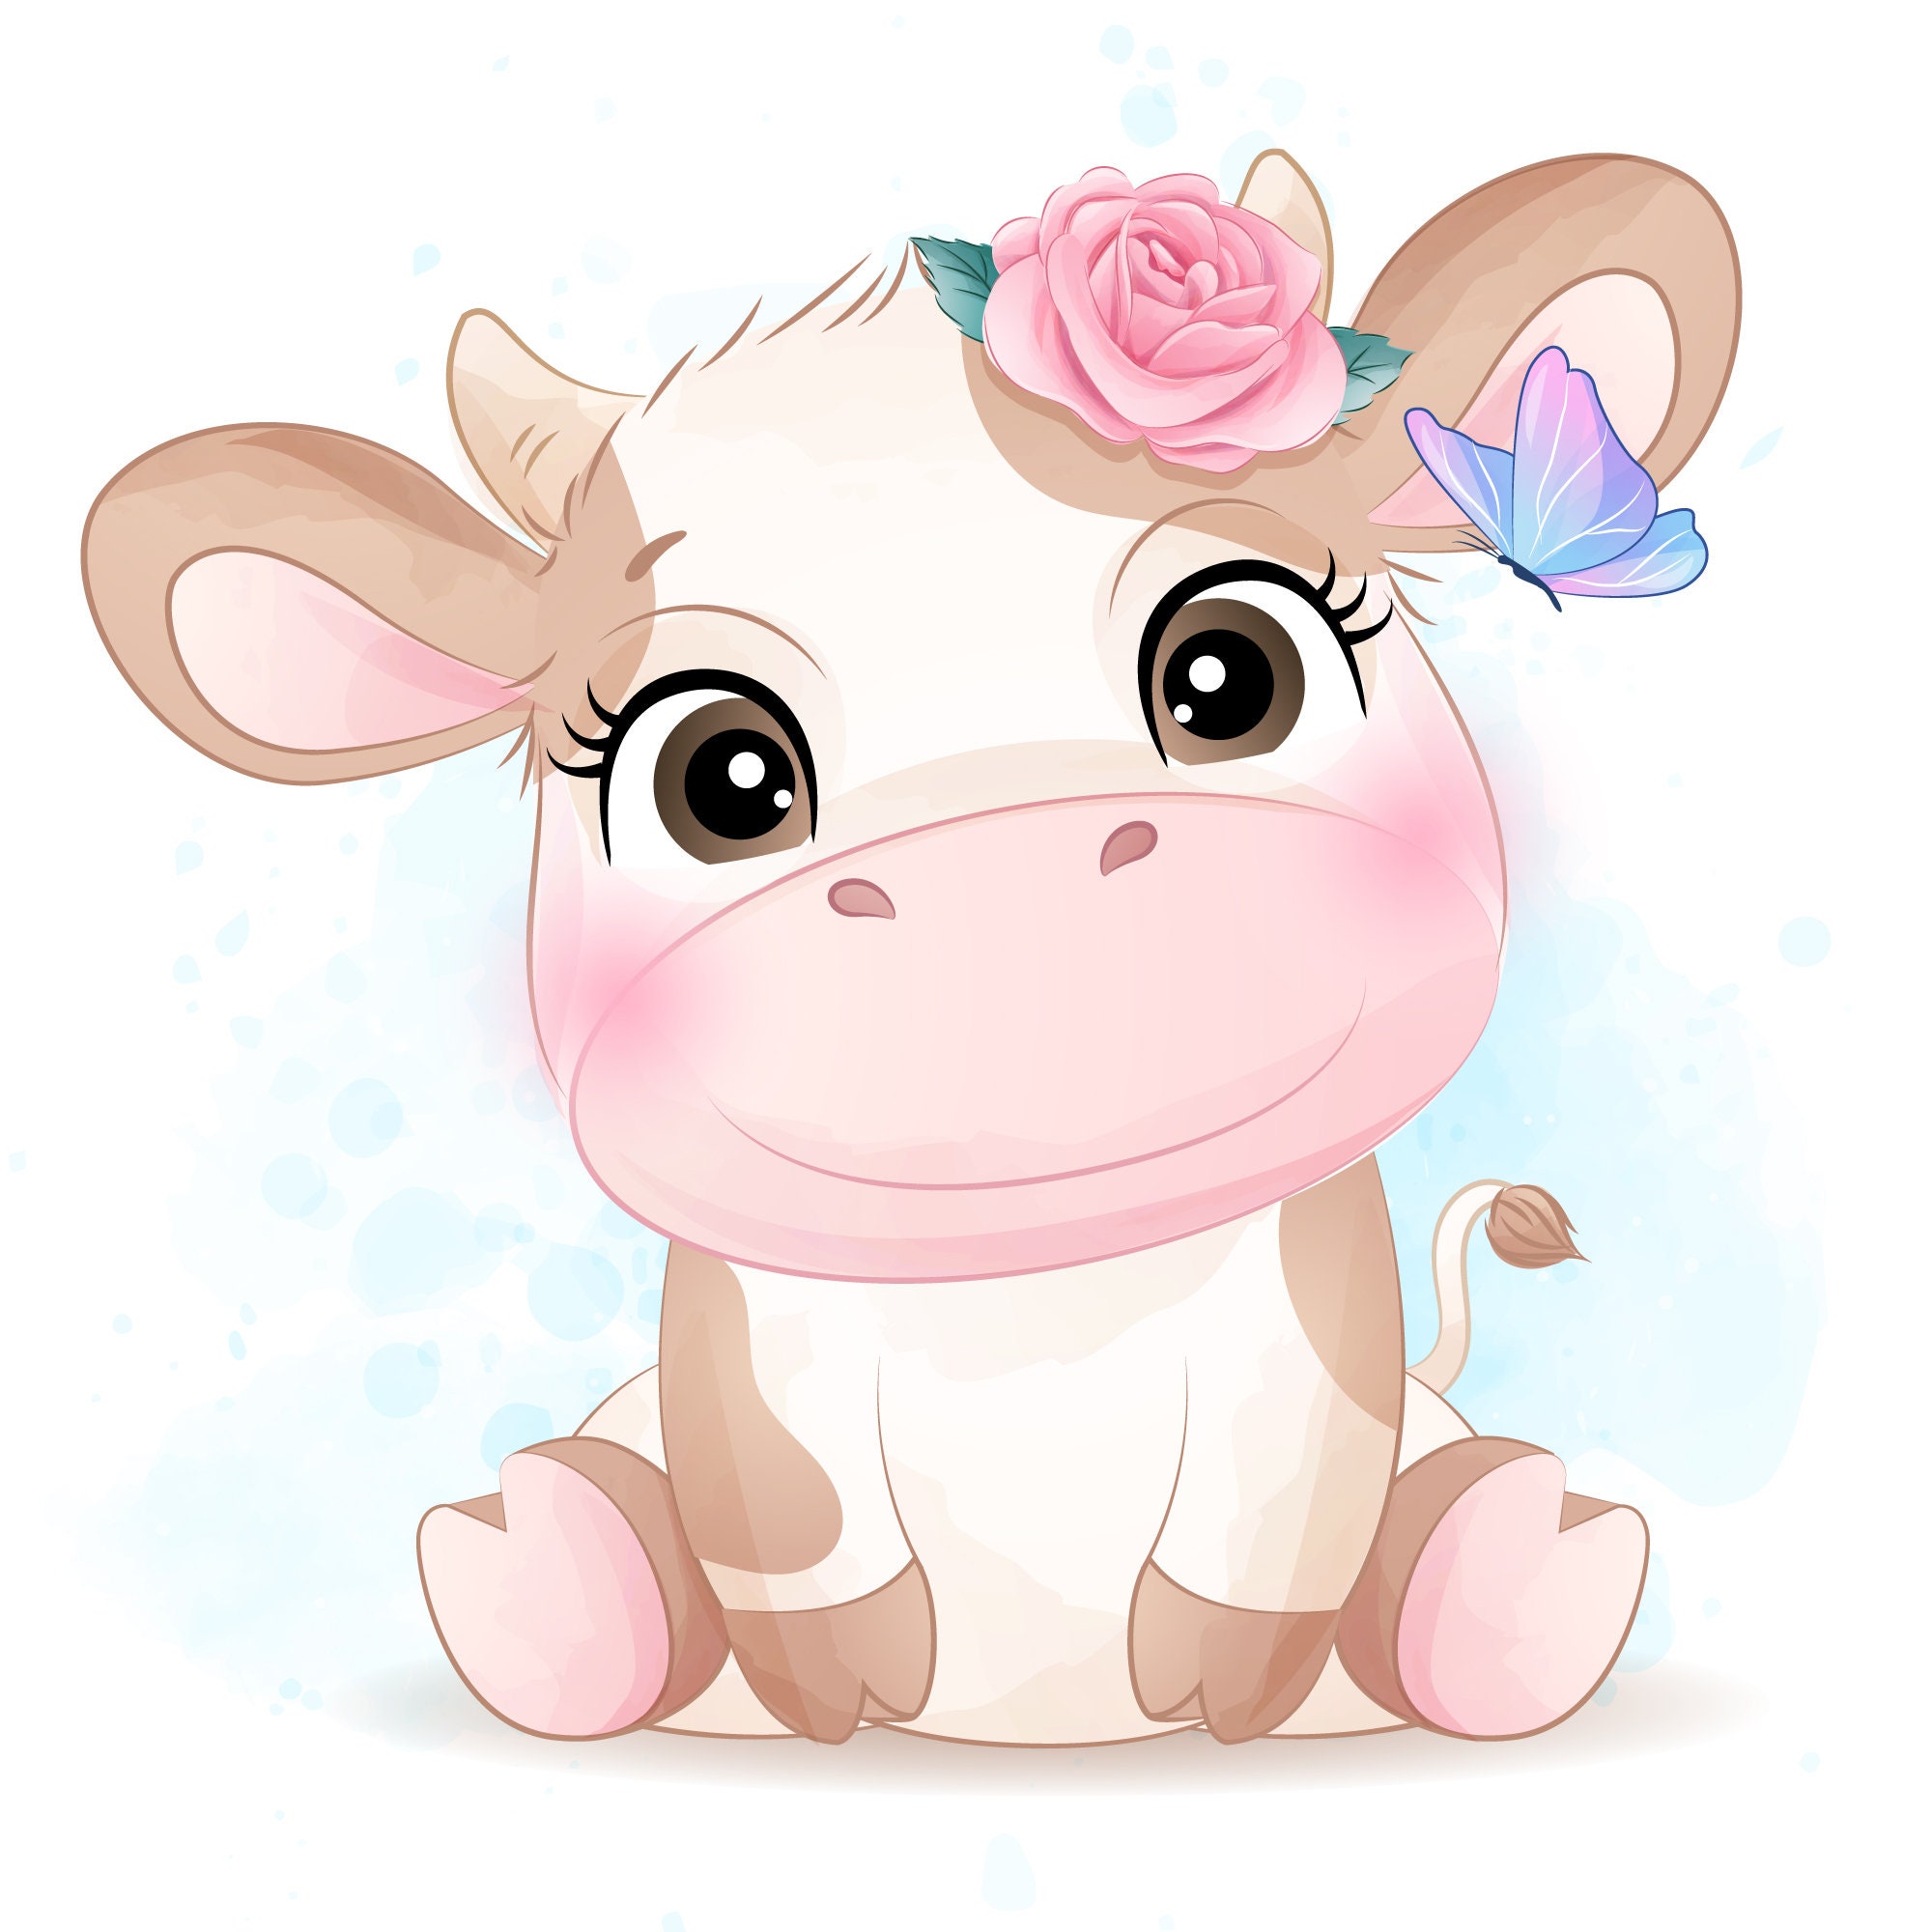 Cute doodle cow clipart with watercolor illustration